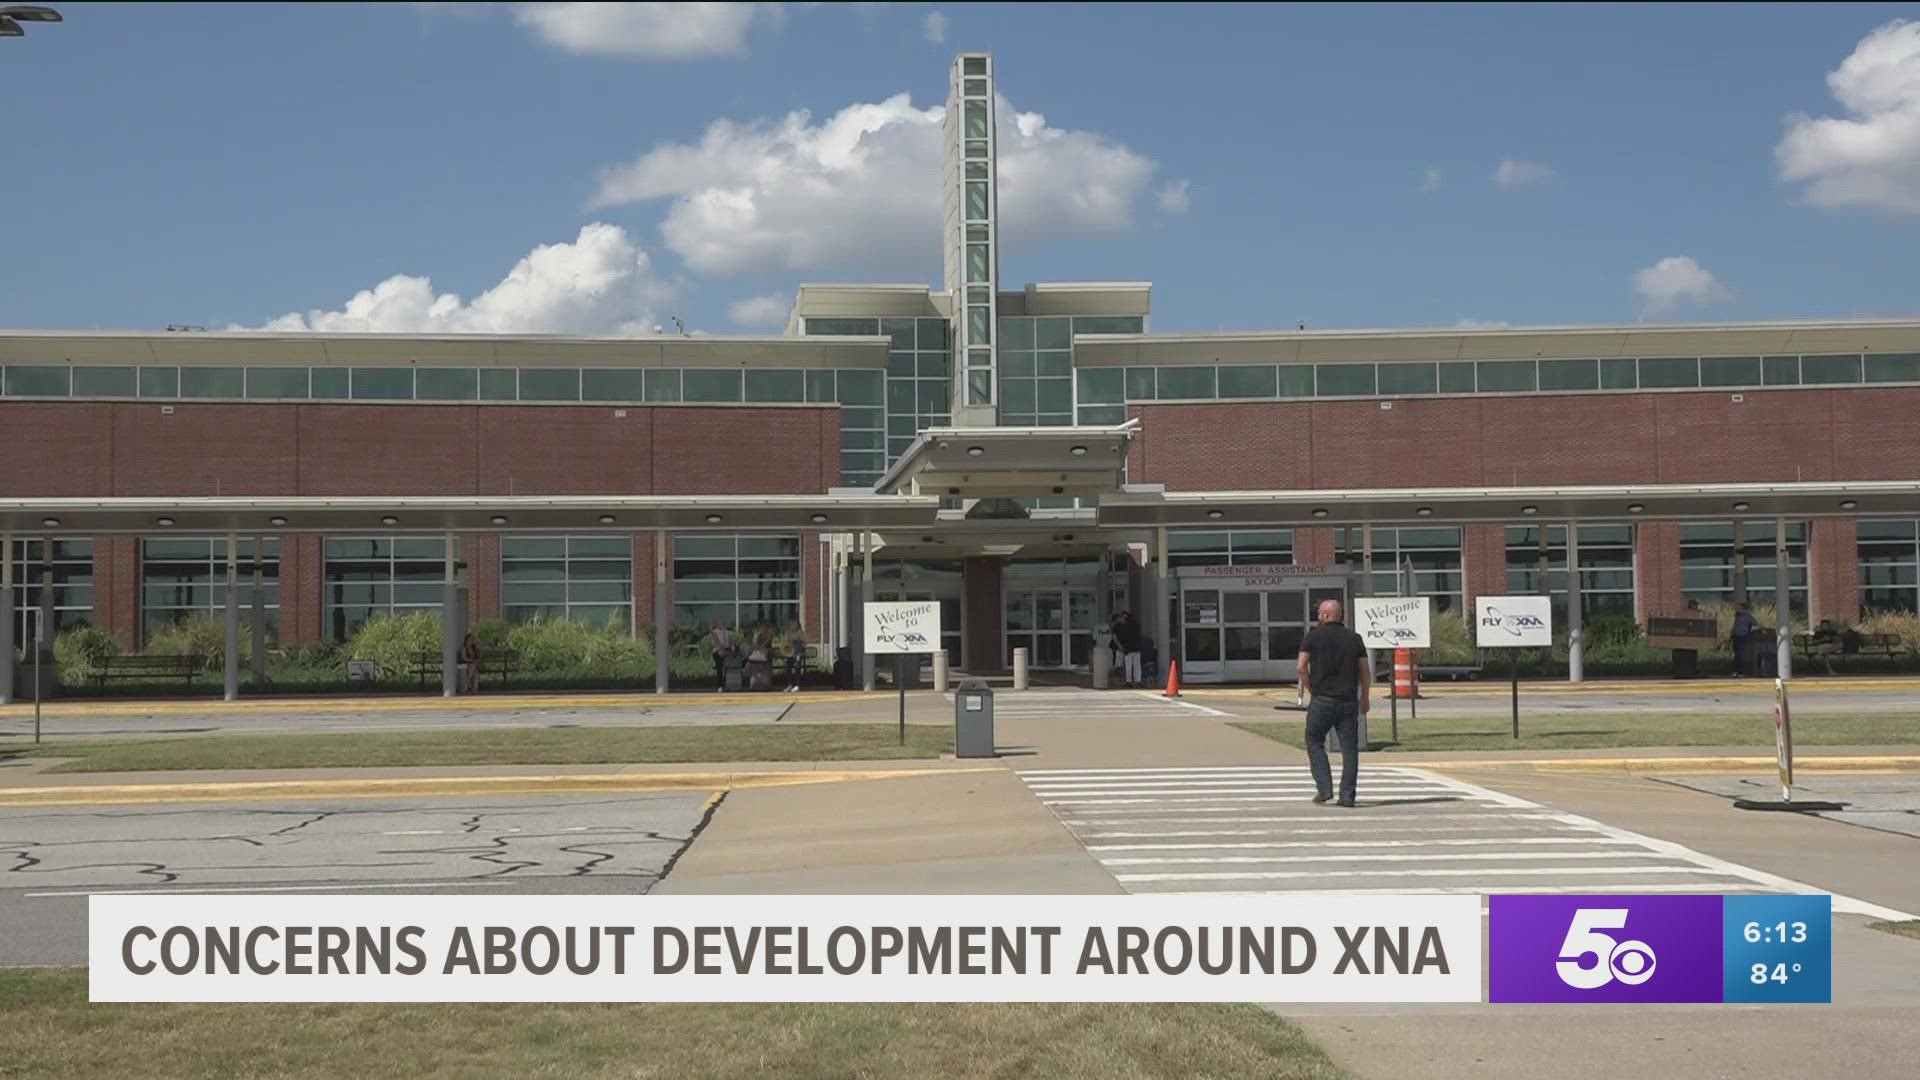 With a need for future expansion, XNA worries that many housing developments are getting close to the airport.